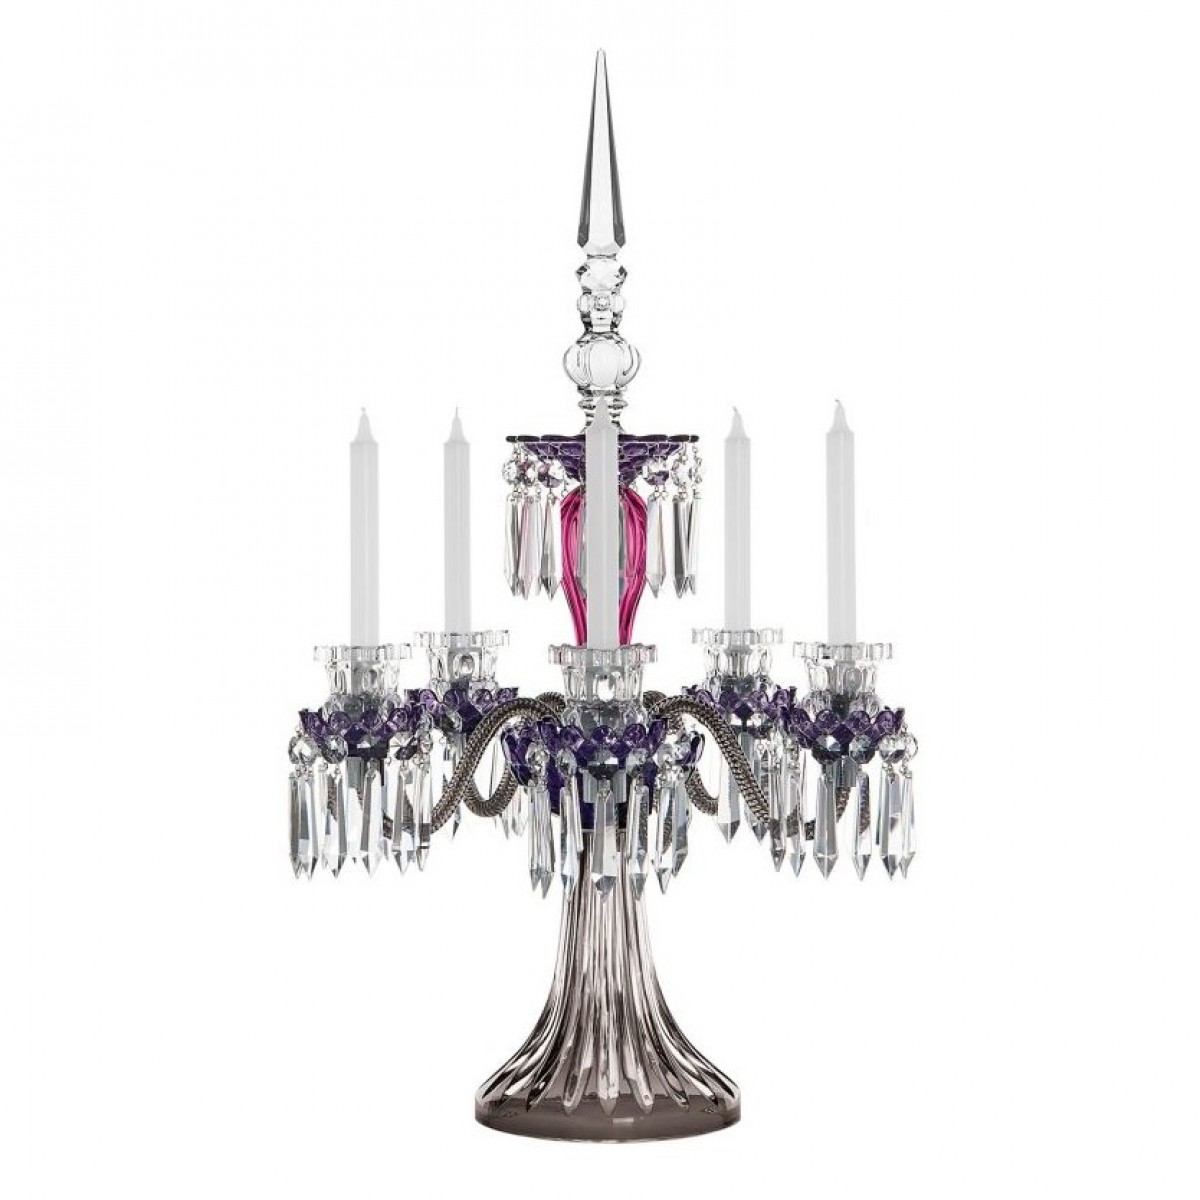 Arlequin 5-Candle Candelabra - Amethyst, Purple and Flannel-grey